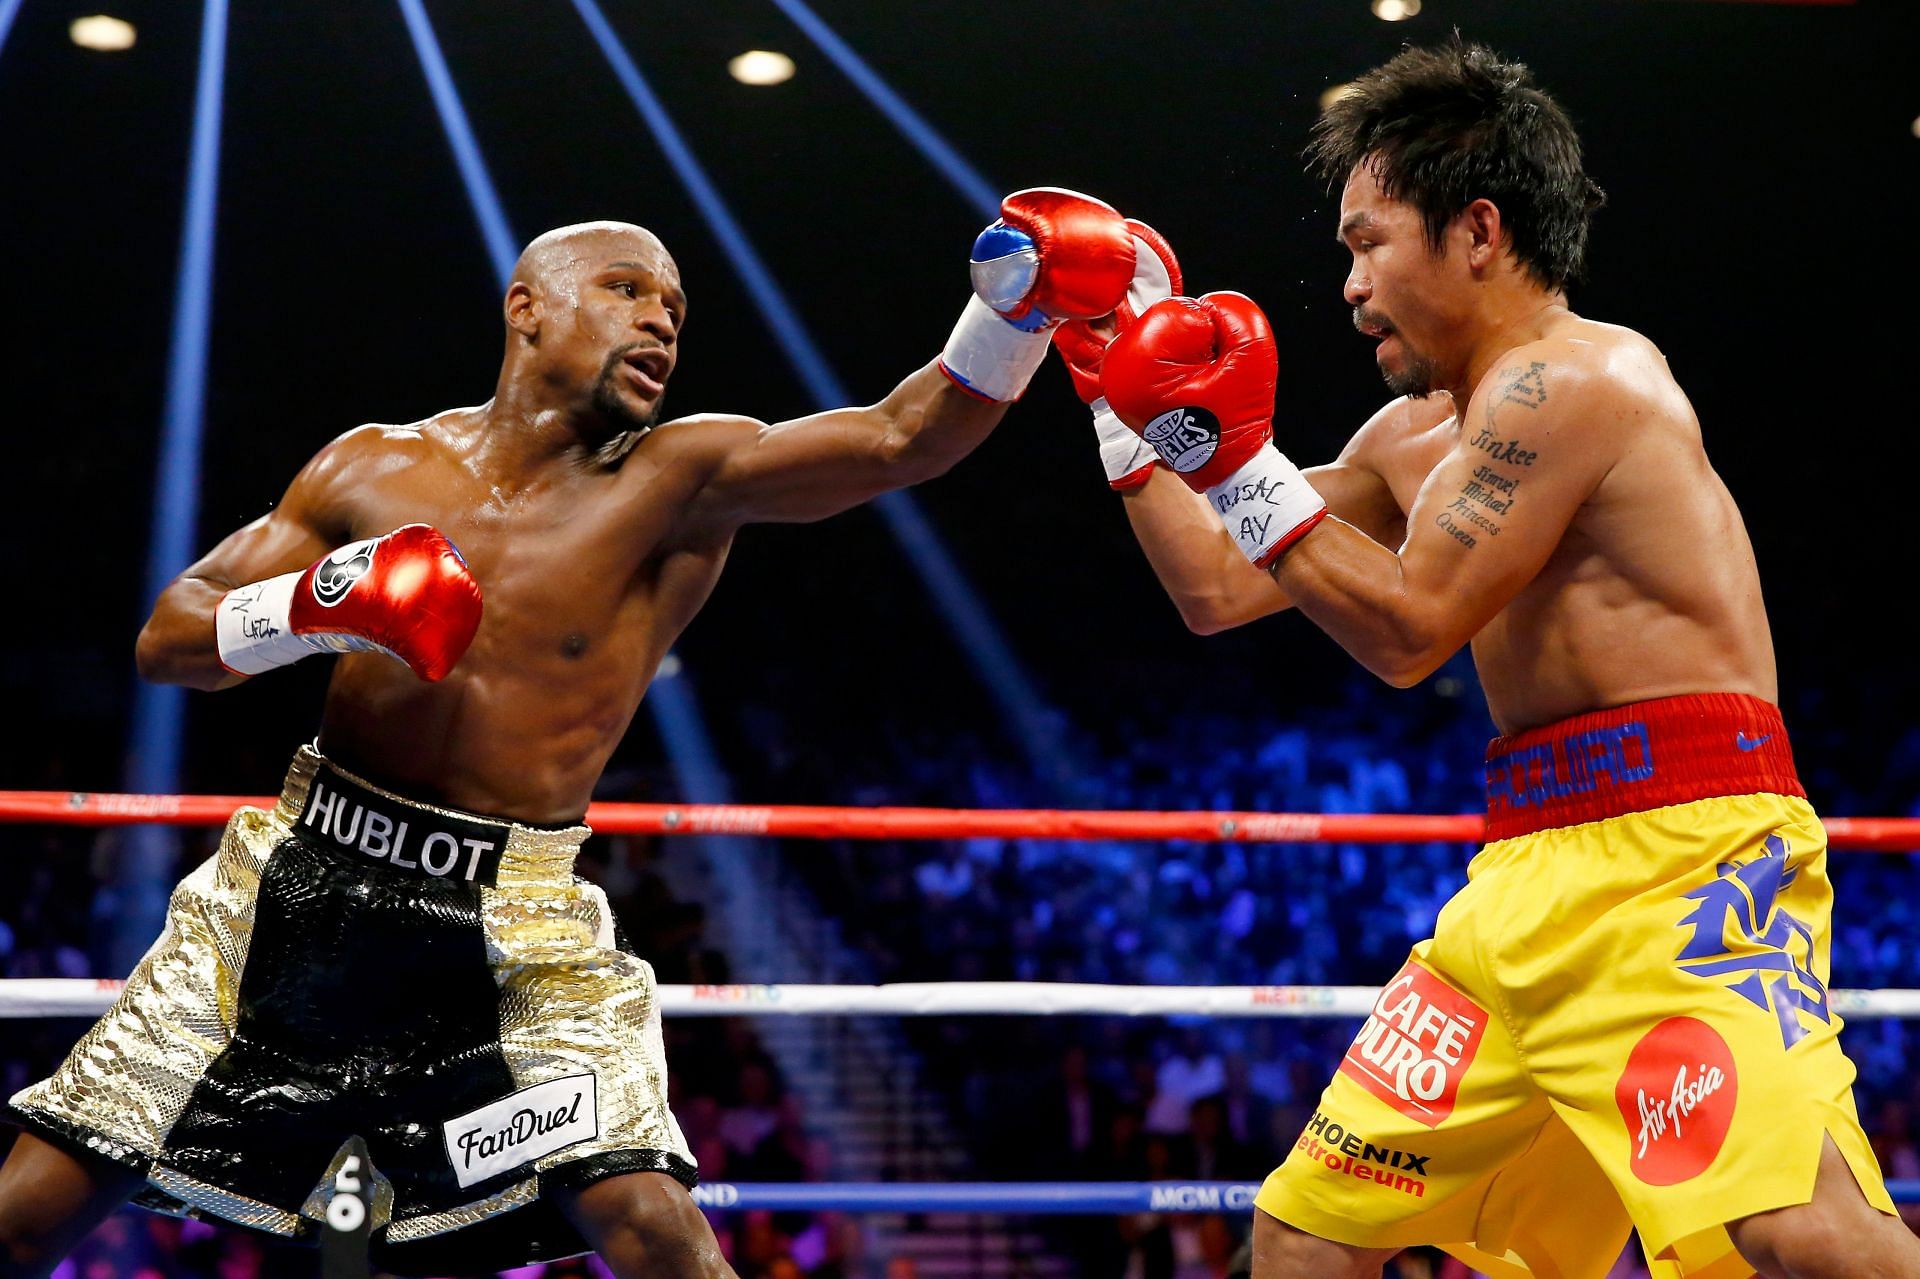 Floyd Mayweather Jr. v Manny Pacquiao (Image courtesy of Getty)